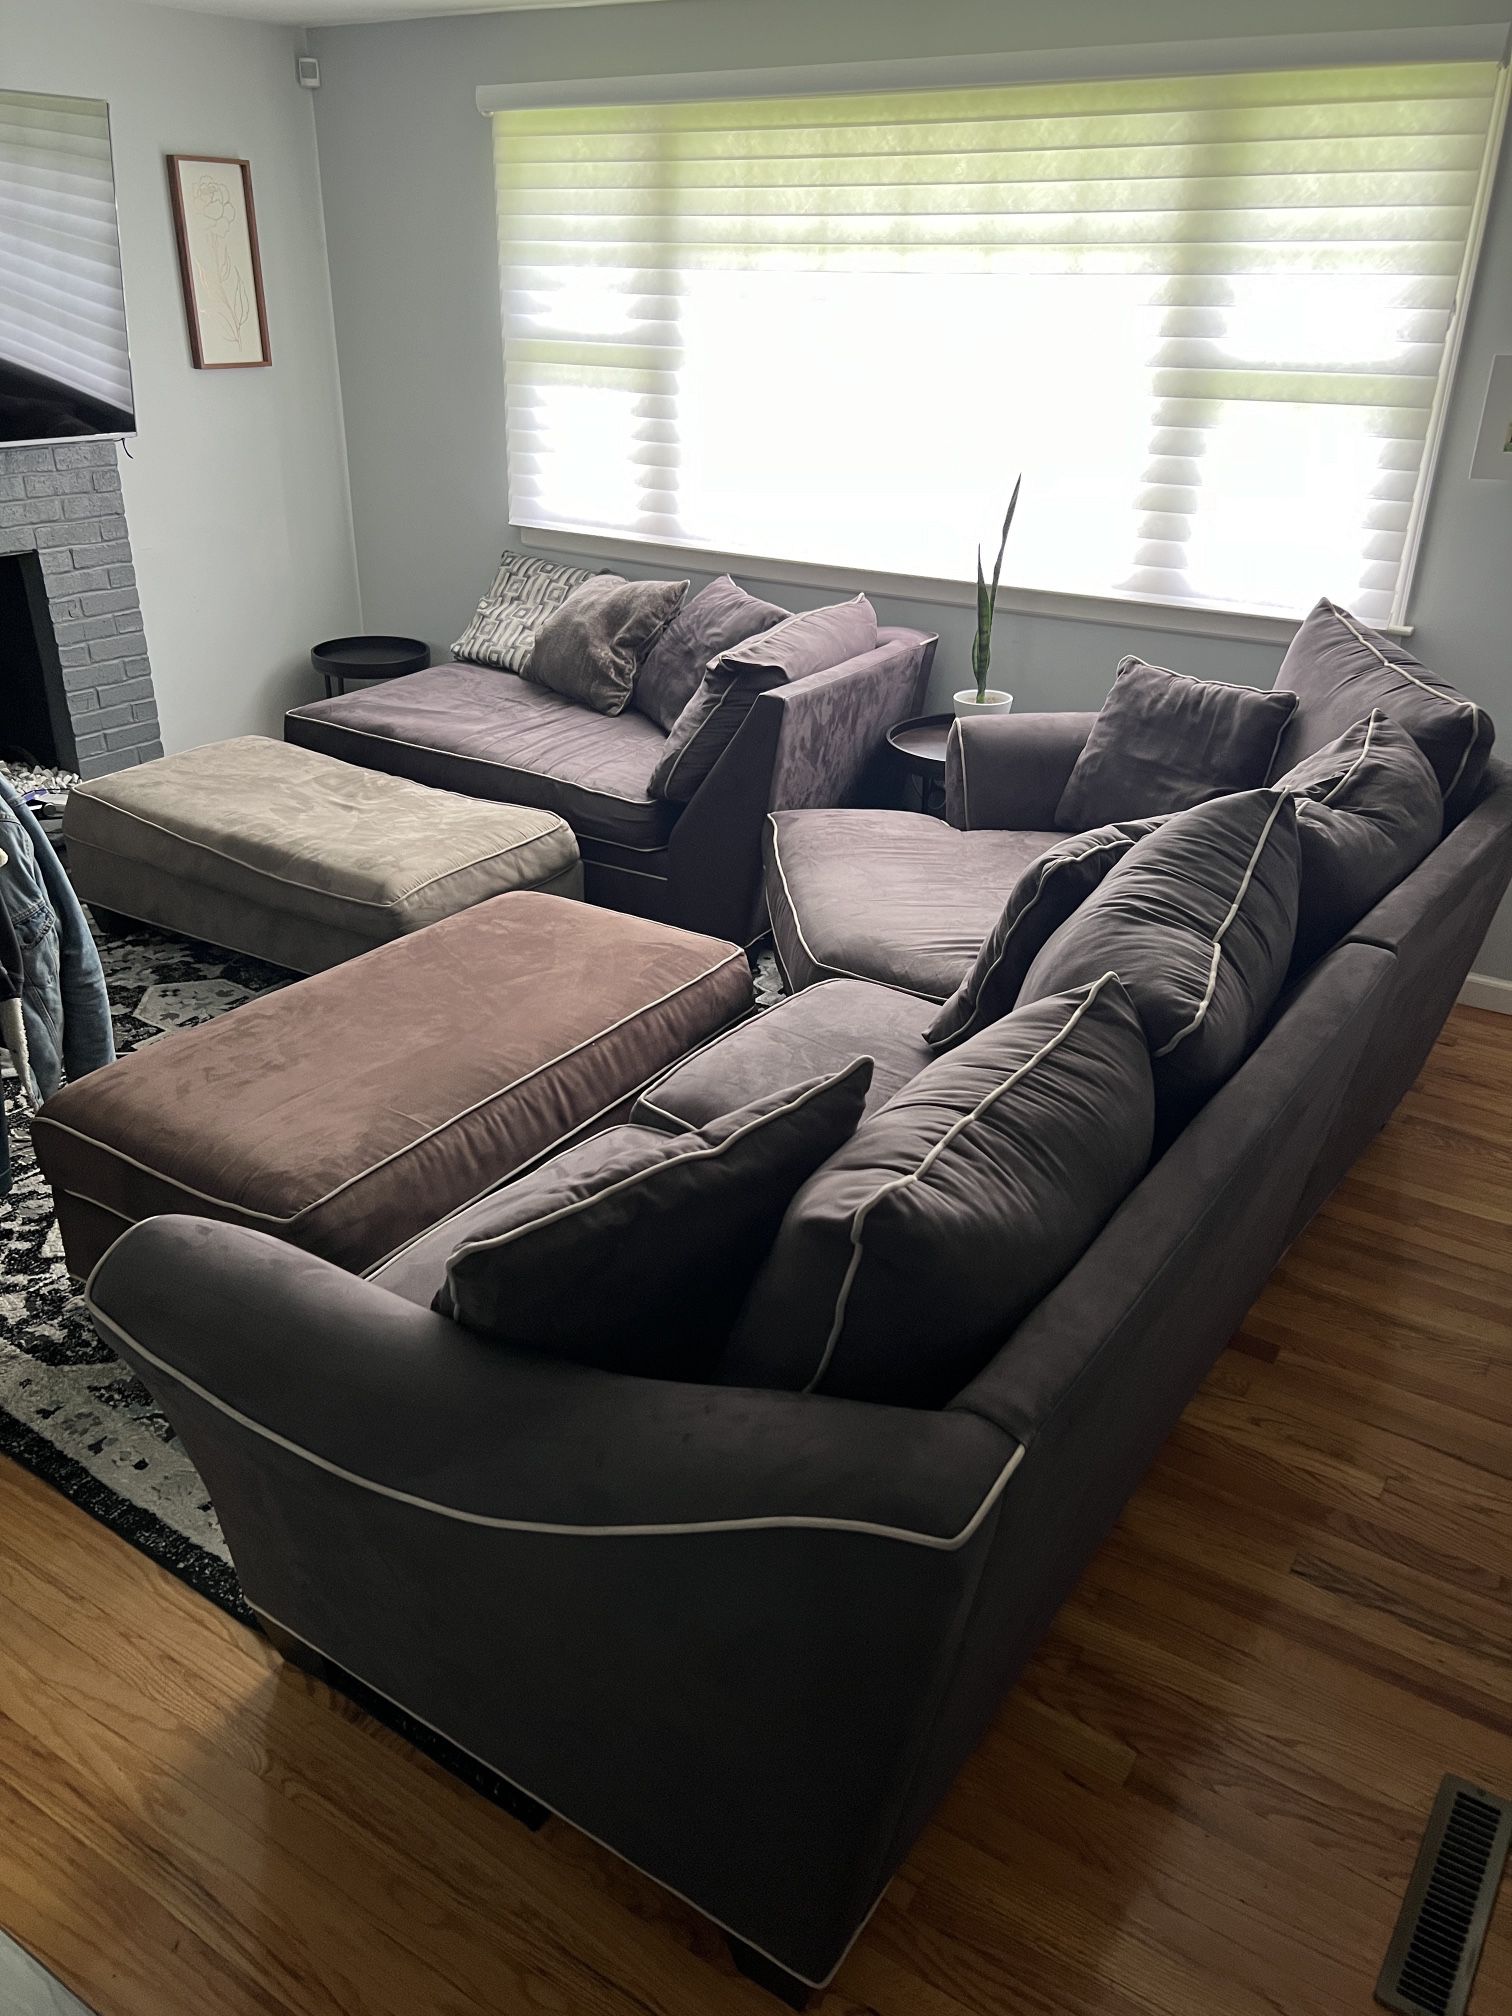 Full Couch Set With Two Ottomans